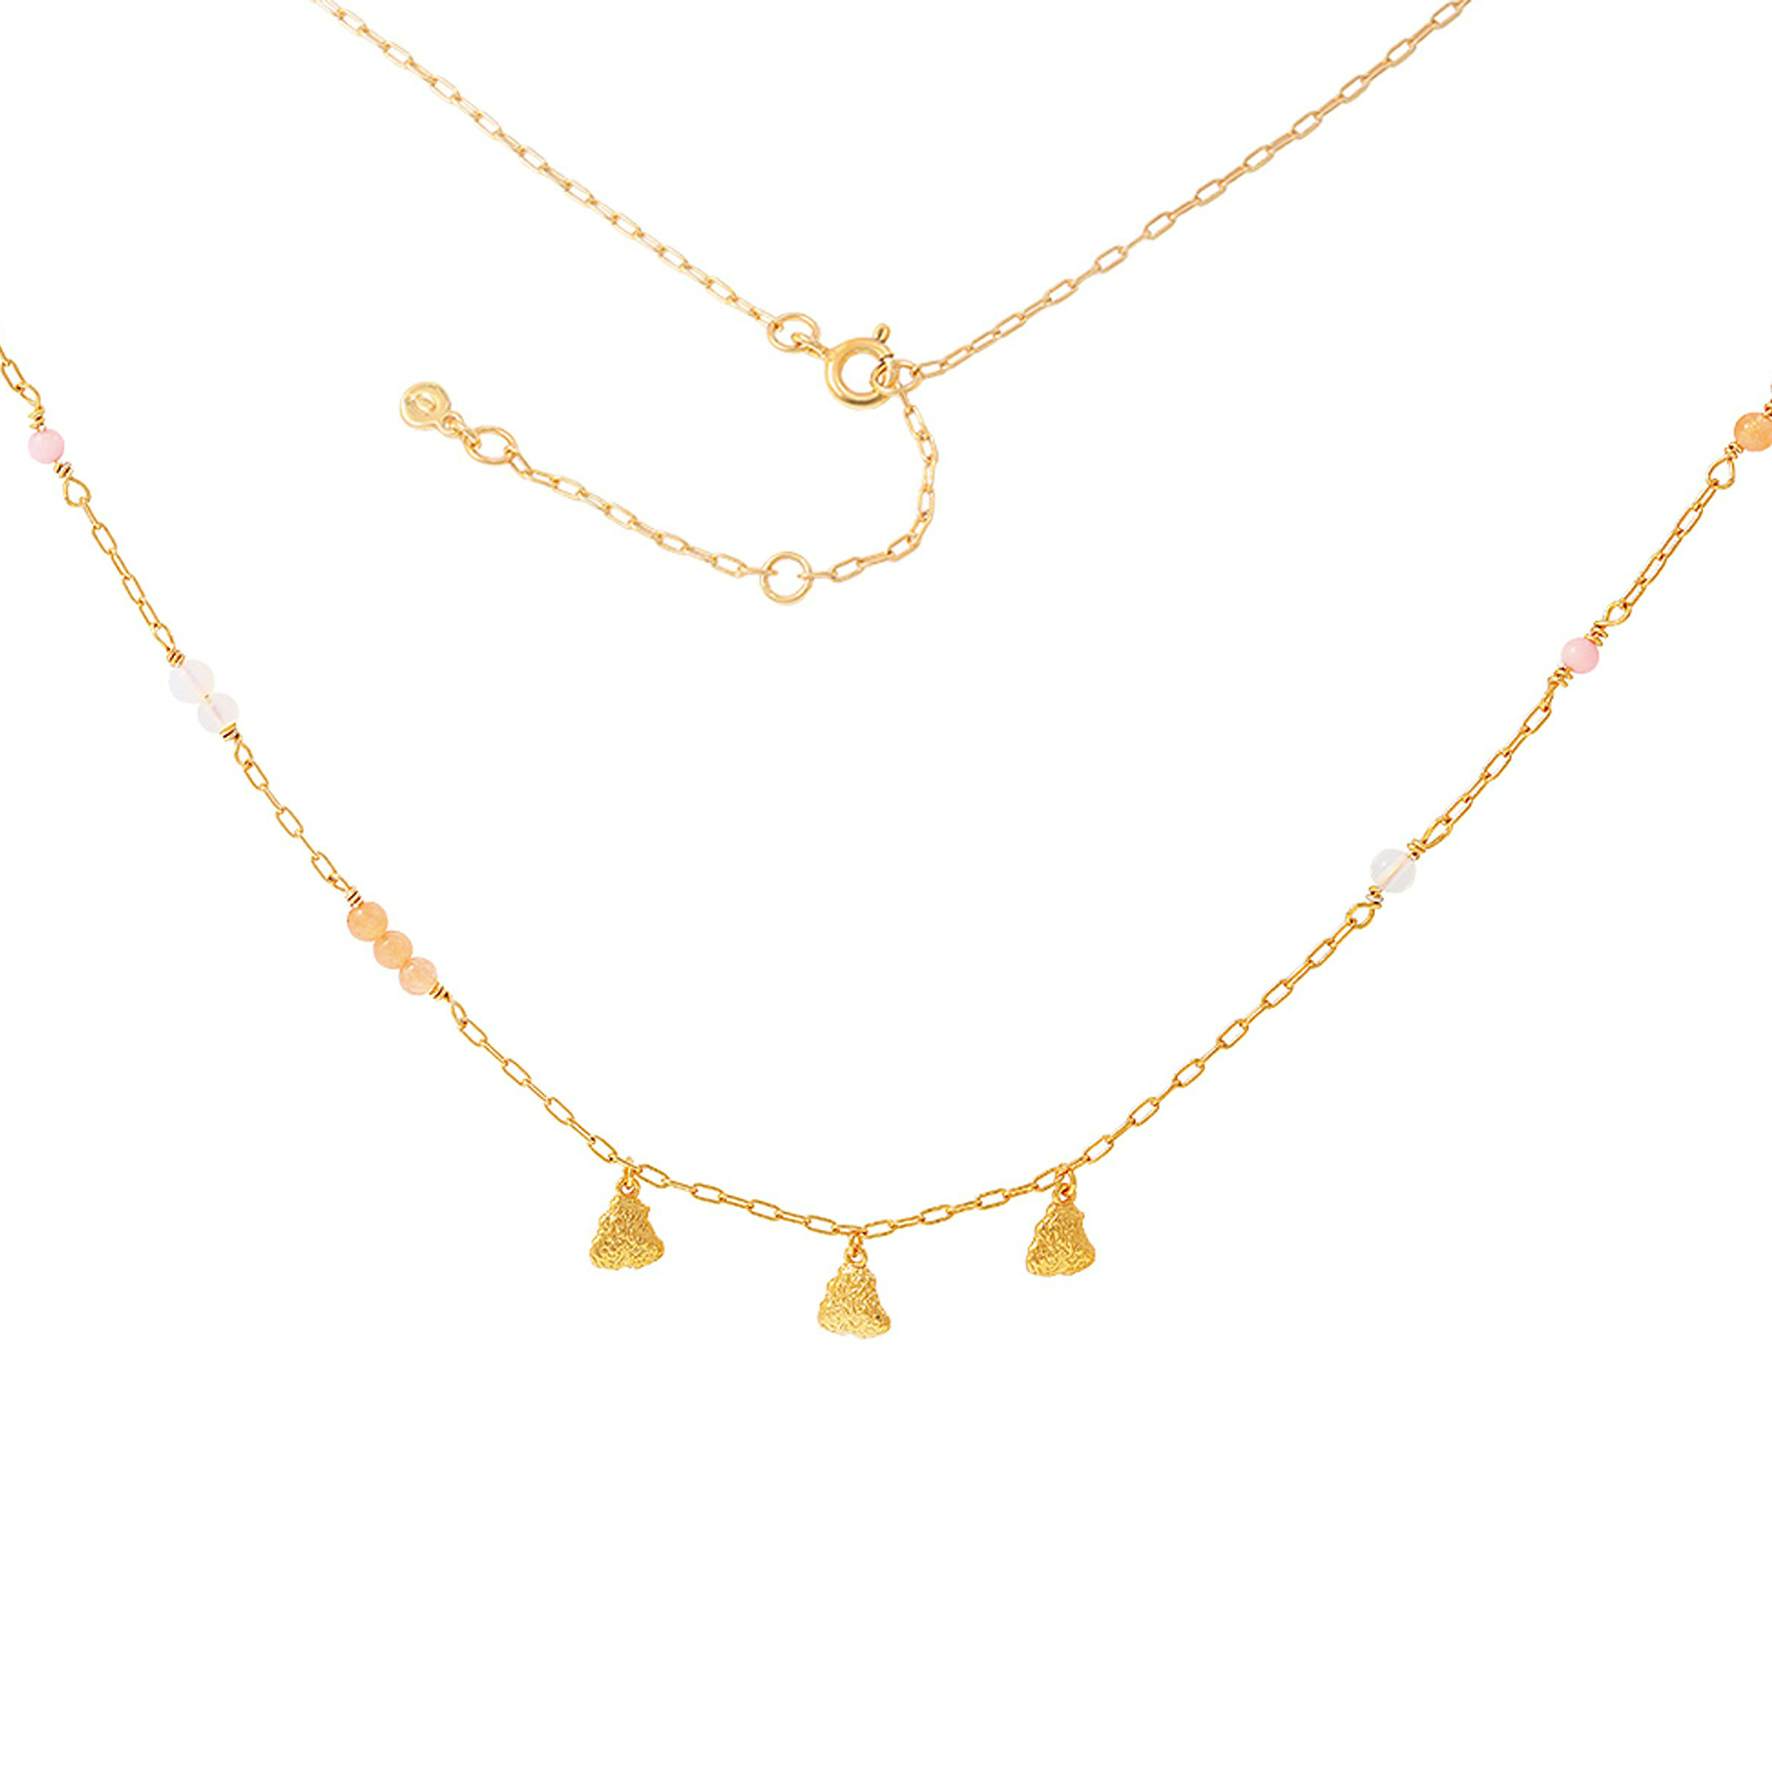 Coralie Grande Necklace from Hultquist Copenhagen in Goldplated-Silver Sterling 925